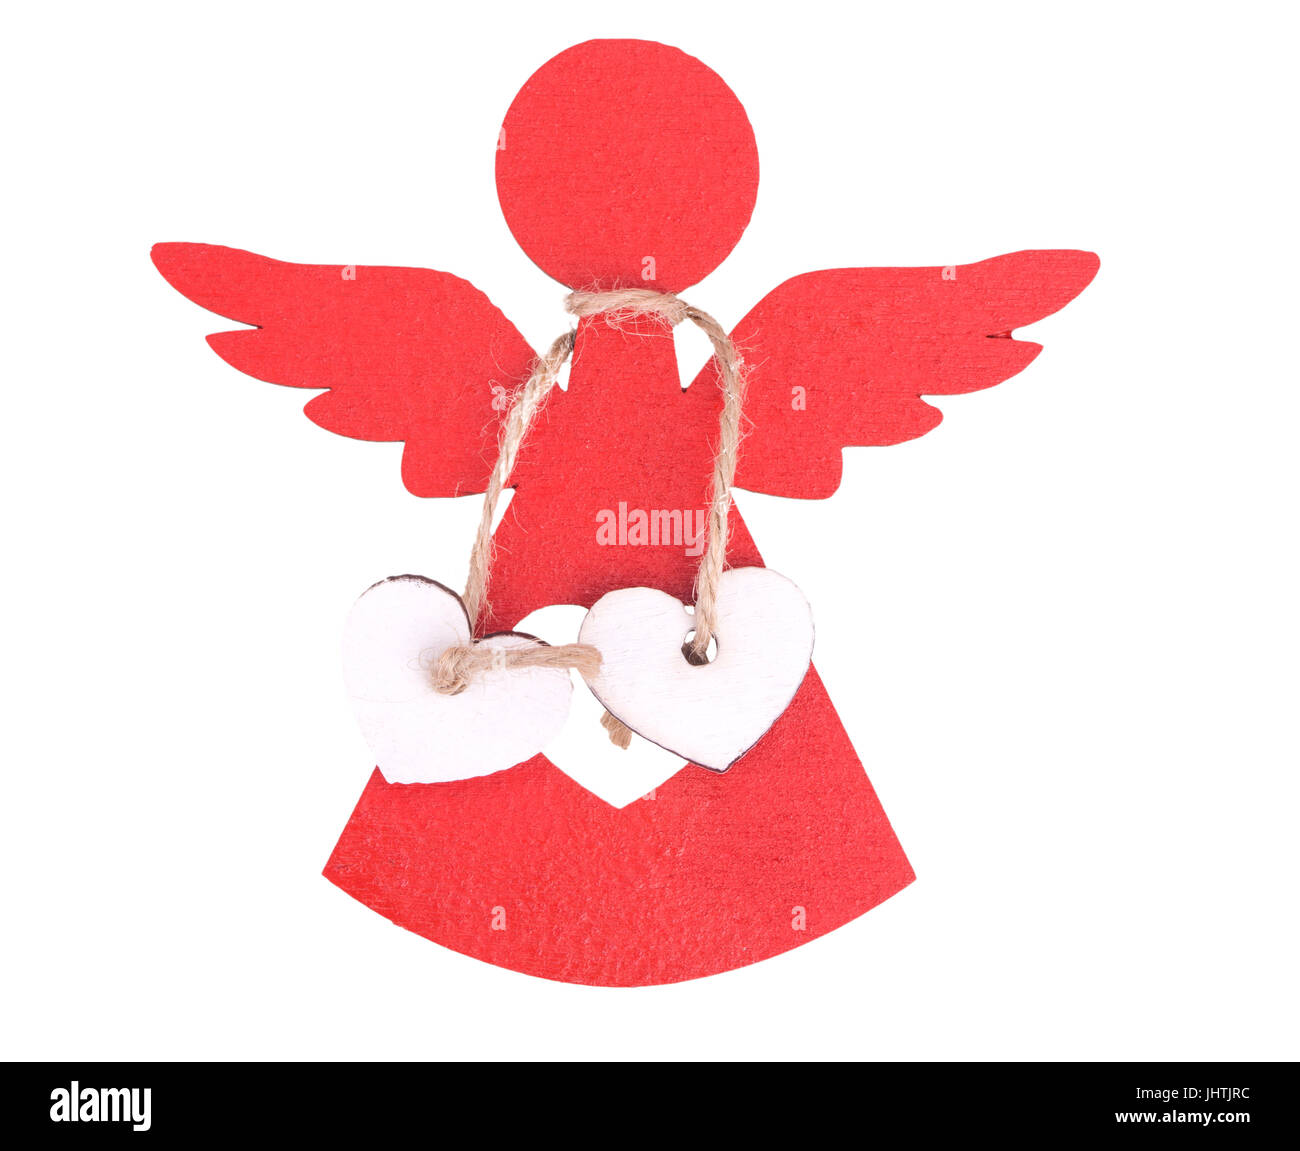 Christmas decorations of red Angel with two linked white hearts isolated on white background Stock Photo